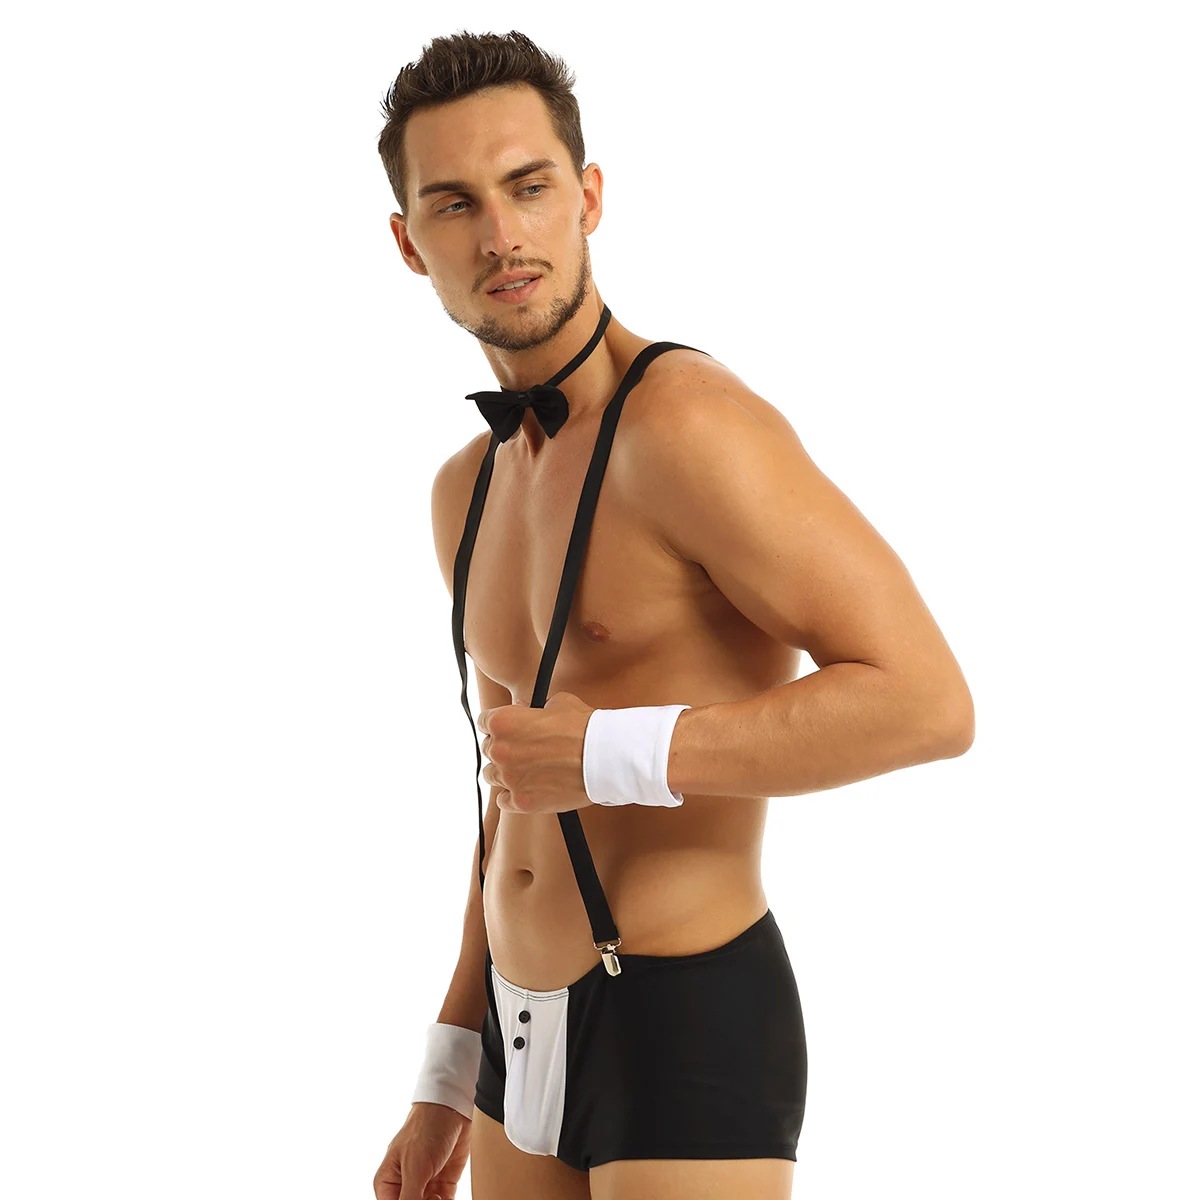 inhzoy Mens Groom Tuxedo Set Suspender Boxer Briefs with Bow Tie Collar and Bracelets 